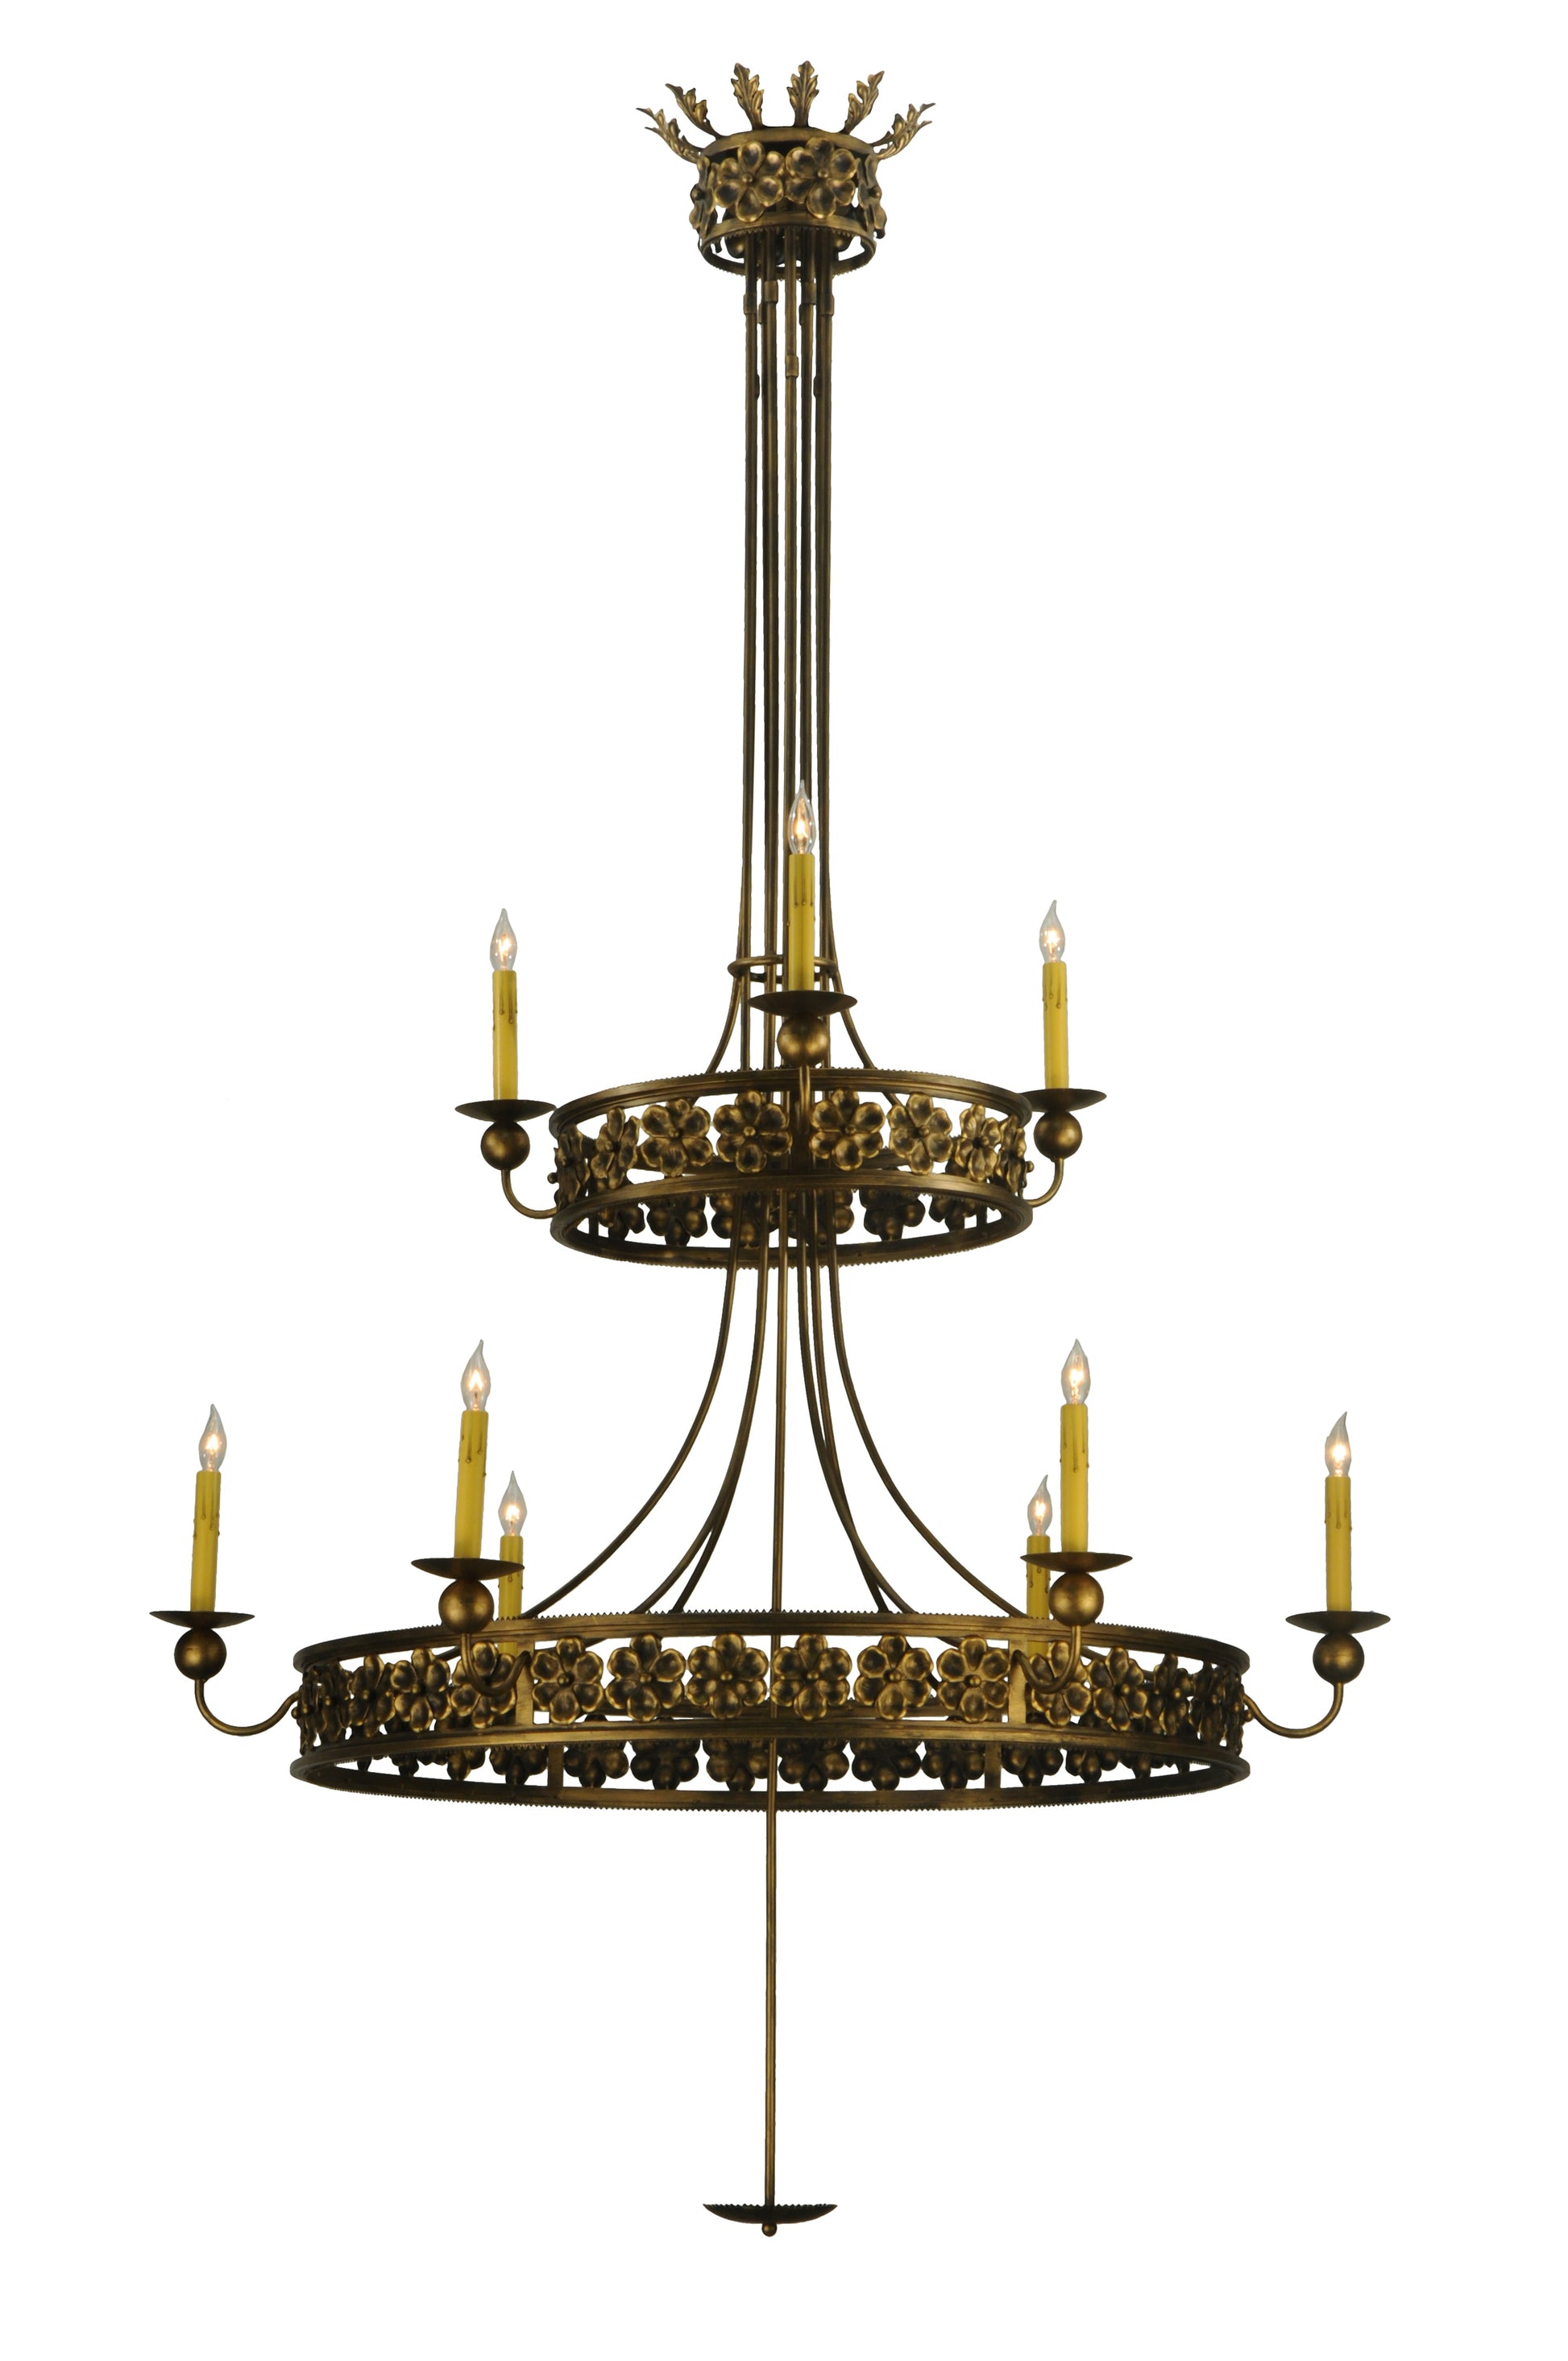 48" Montgomery 2 Tier Chandelier by 2nd Ave Lighting